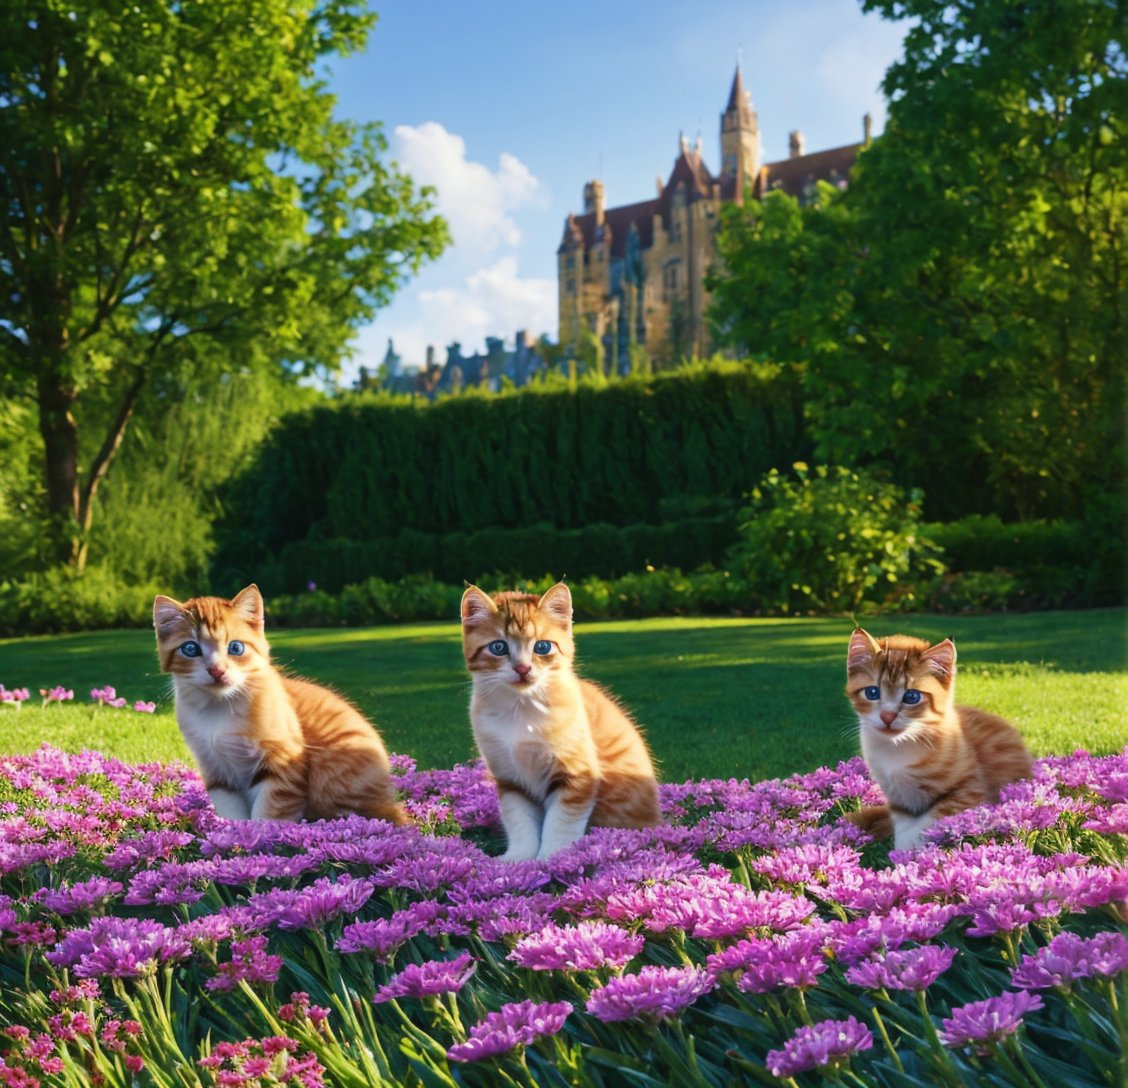 hdr, 8k, subsurface scattering, specular lighting, high resolution, octane rendering, 6 realistic happy 6 kittens playing, castle in the background, big garden, 6 kittens, blue eyes, tender look, cuteness, LOTS OF FLOWERS AND KITTENS,cartoon 